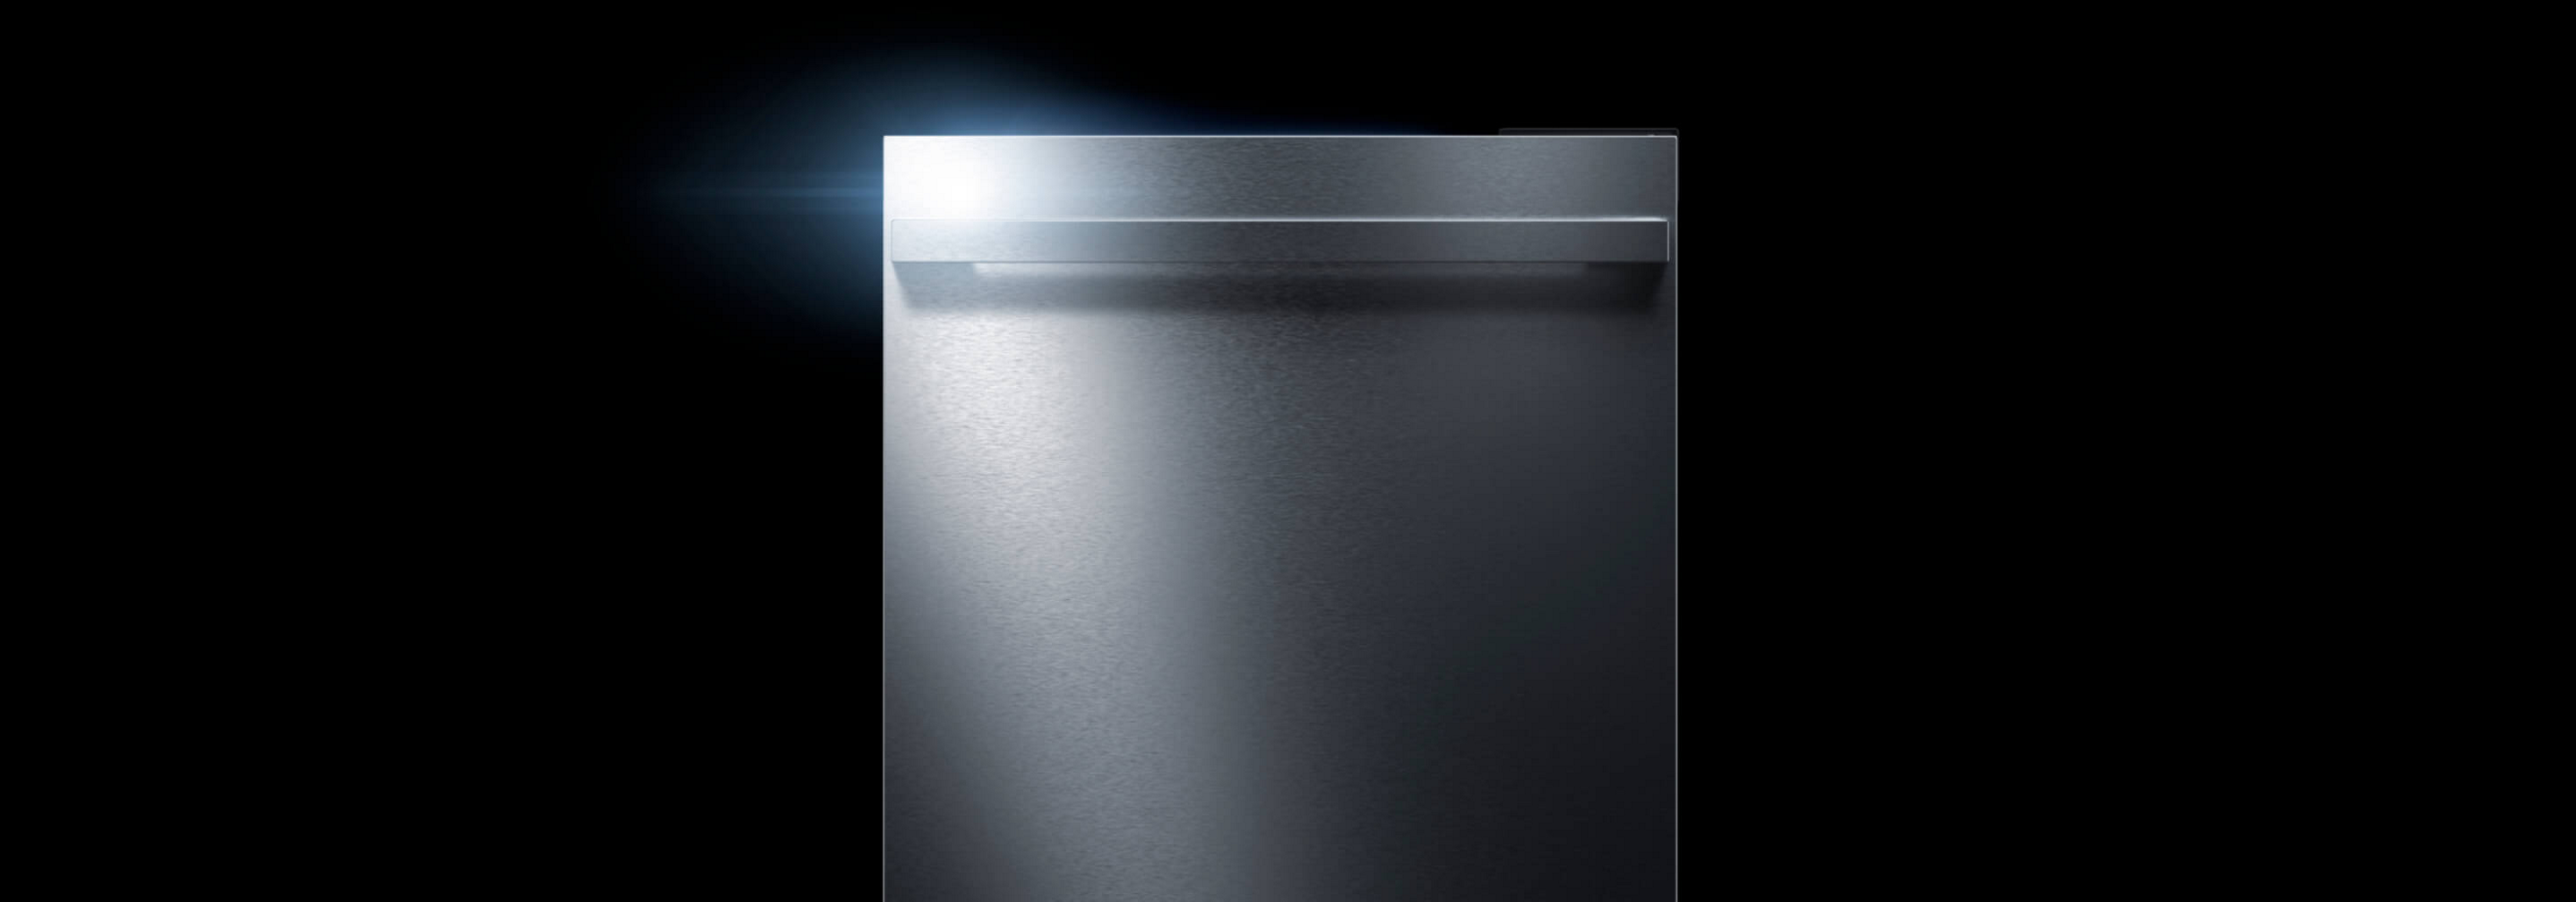 A stainless steel undercounter refrigerator.